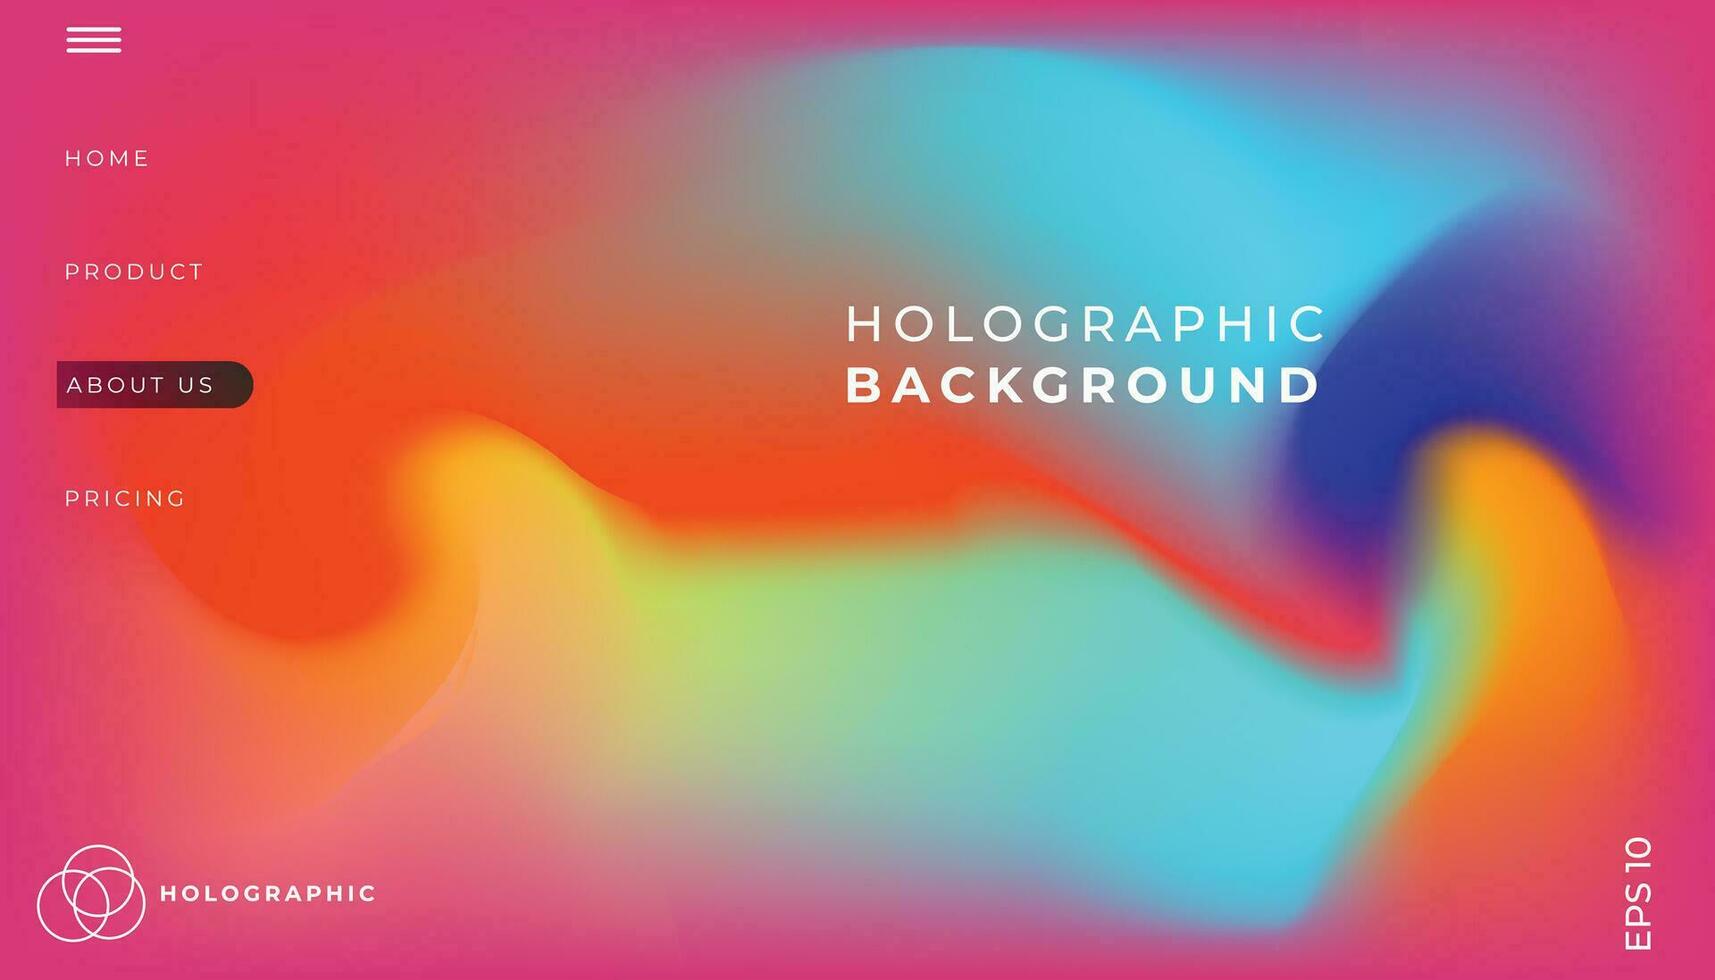 Trendy summer fluid gradient background, colorful abstract liquid 3d shapes. Futuristic design wallpaper for banner, poster, cover, flyer, presentation, advertising, landing page vector